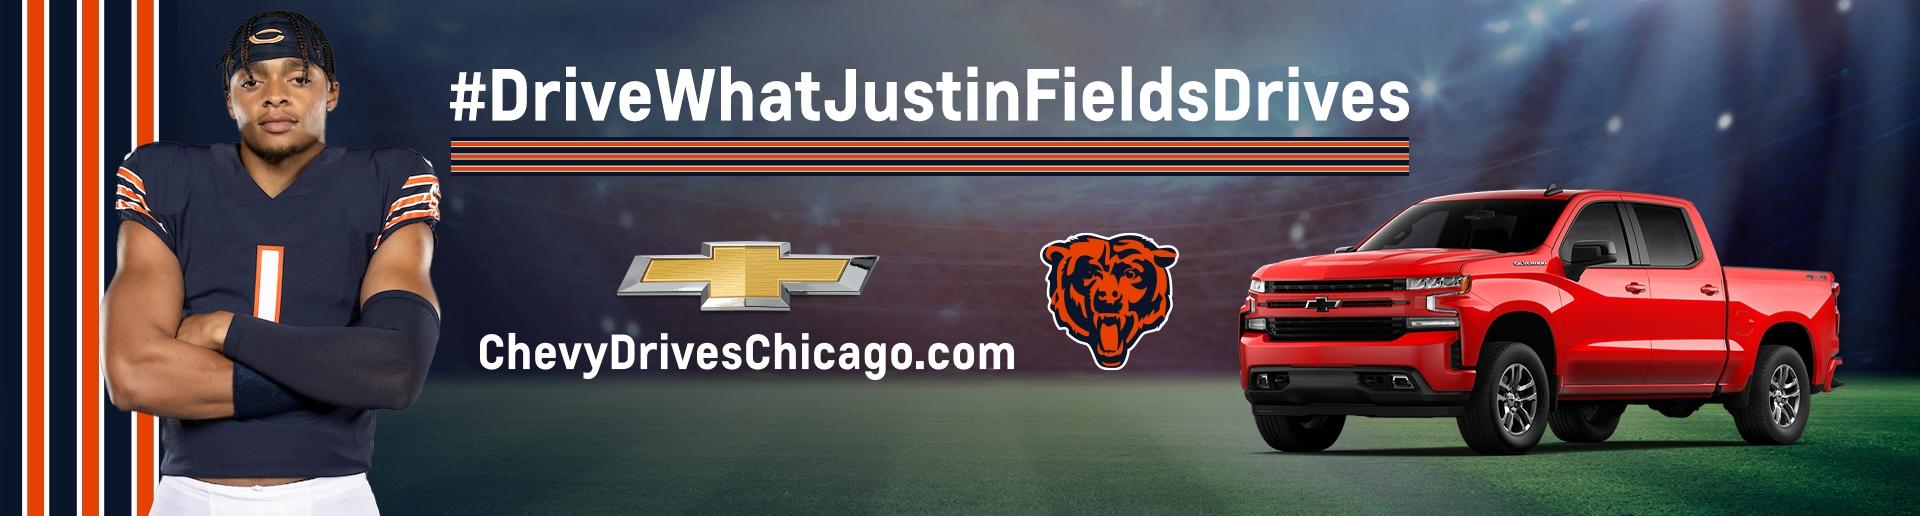 Justin Fields Chicago Bears QB Drives a Chevy Silverado | Chevy Drives Chicago | Chicagoland &amp; NW Indiana Chevy Dealers